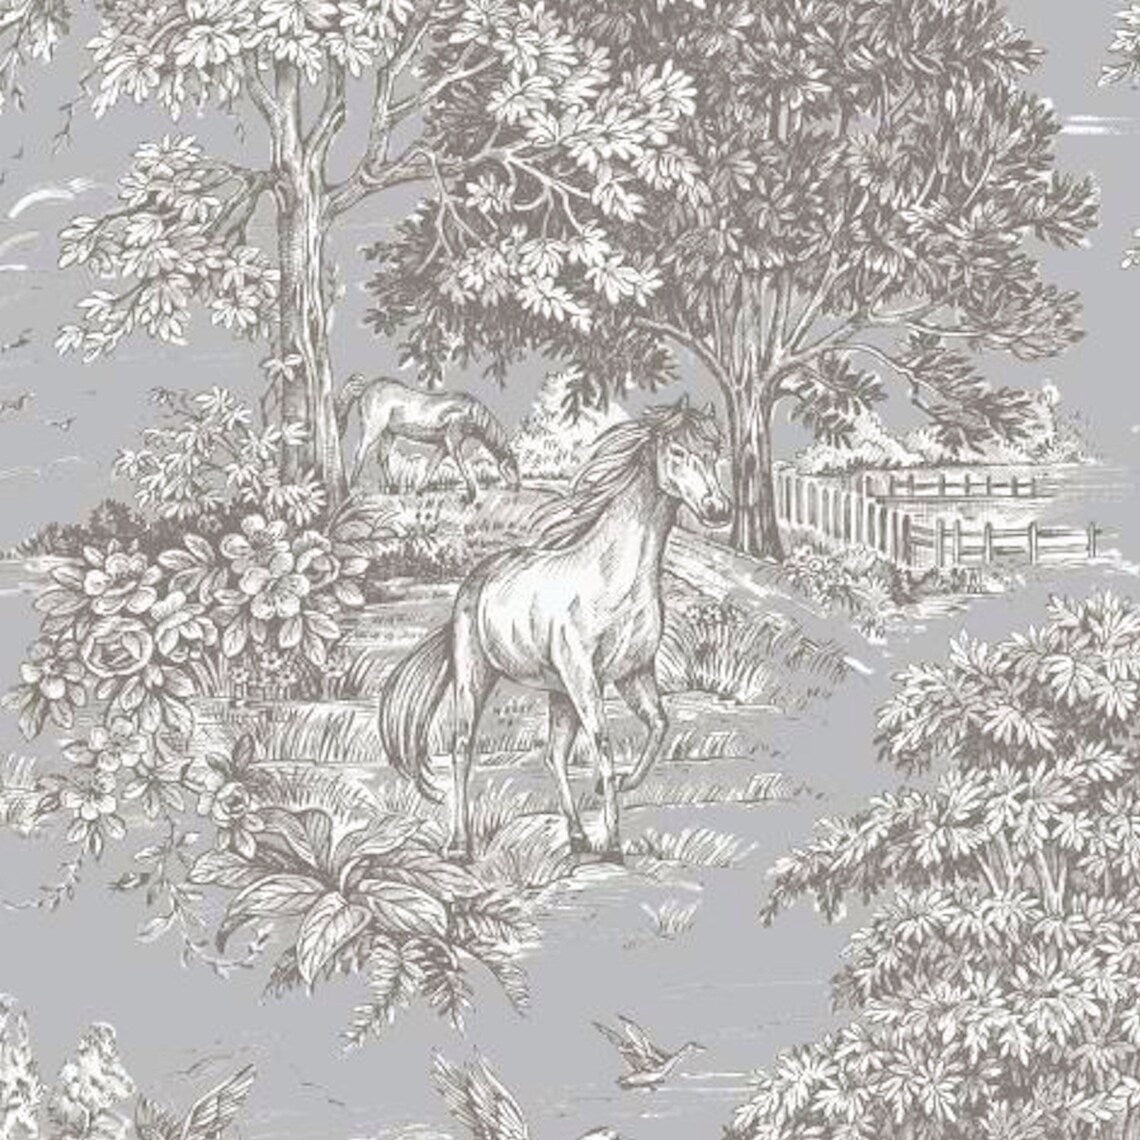 Tailored Bedskirt in Yellowstone Dove Blue Gray Country Toile- Horses, Deer, Dogs- Large Scale